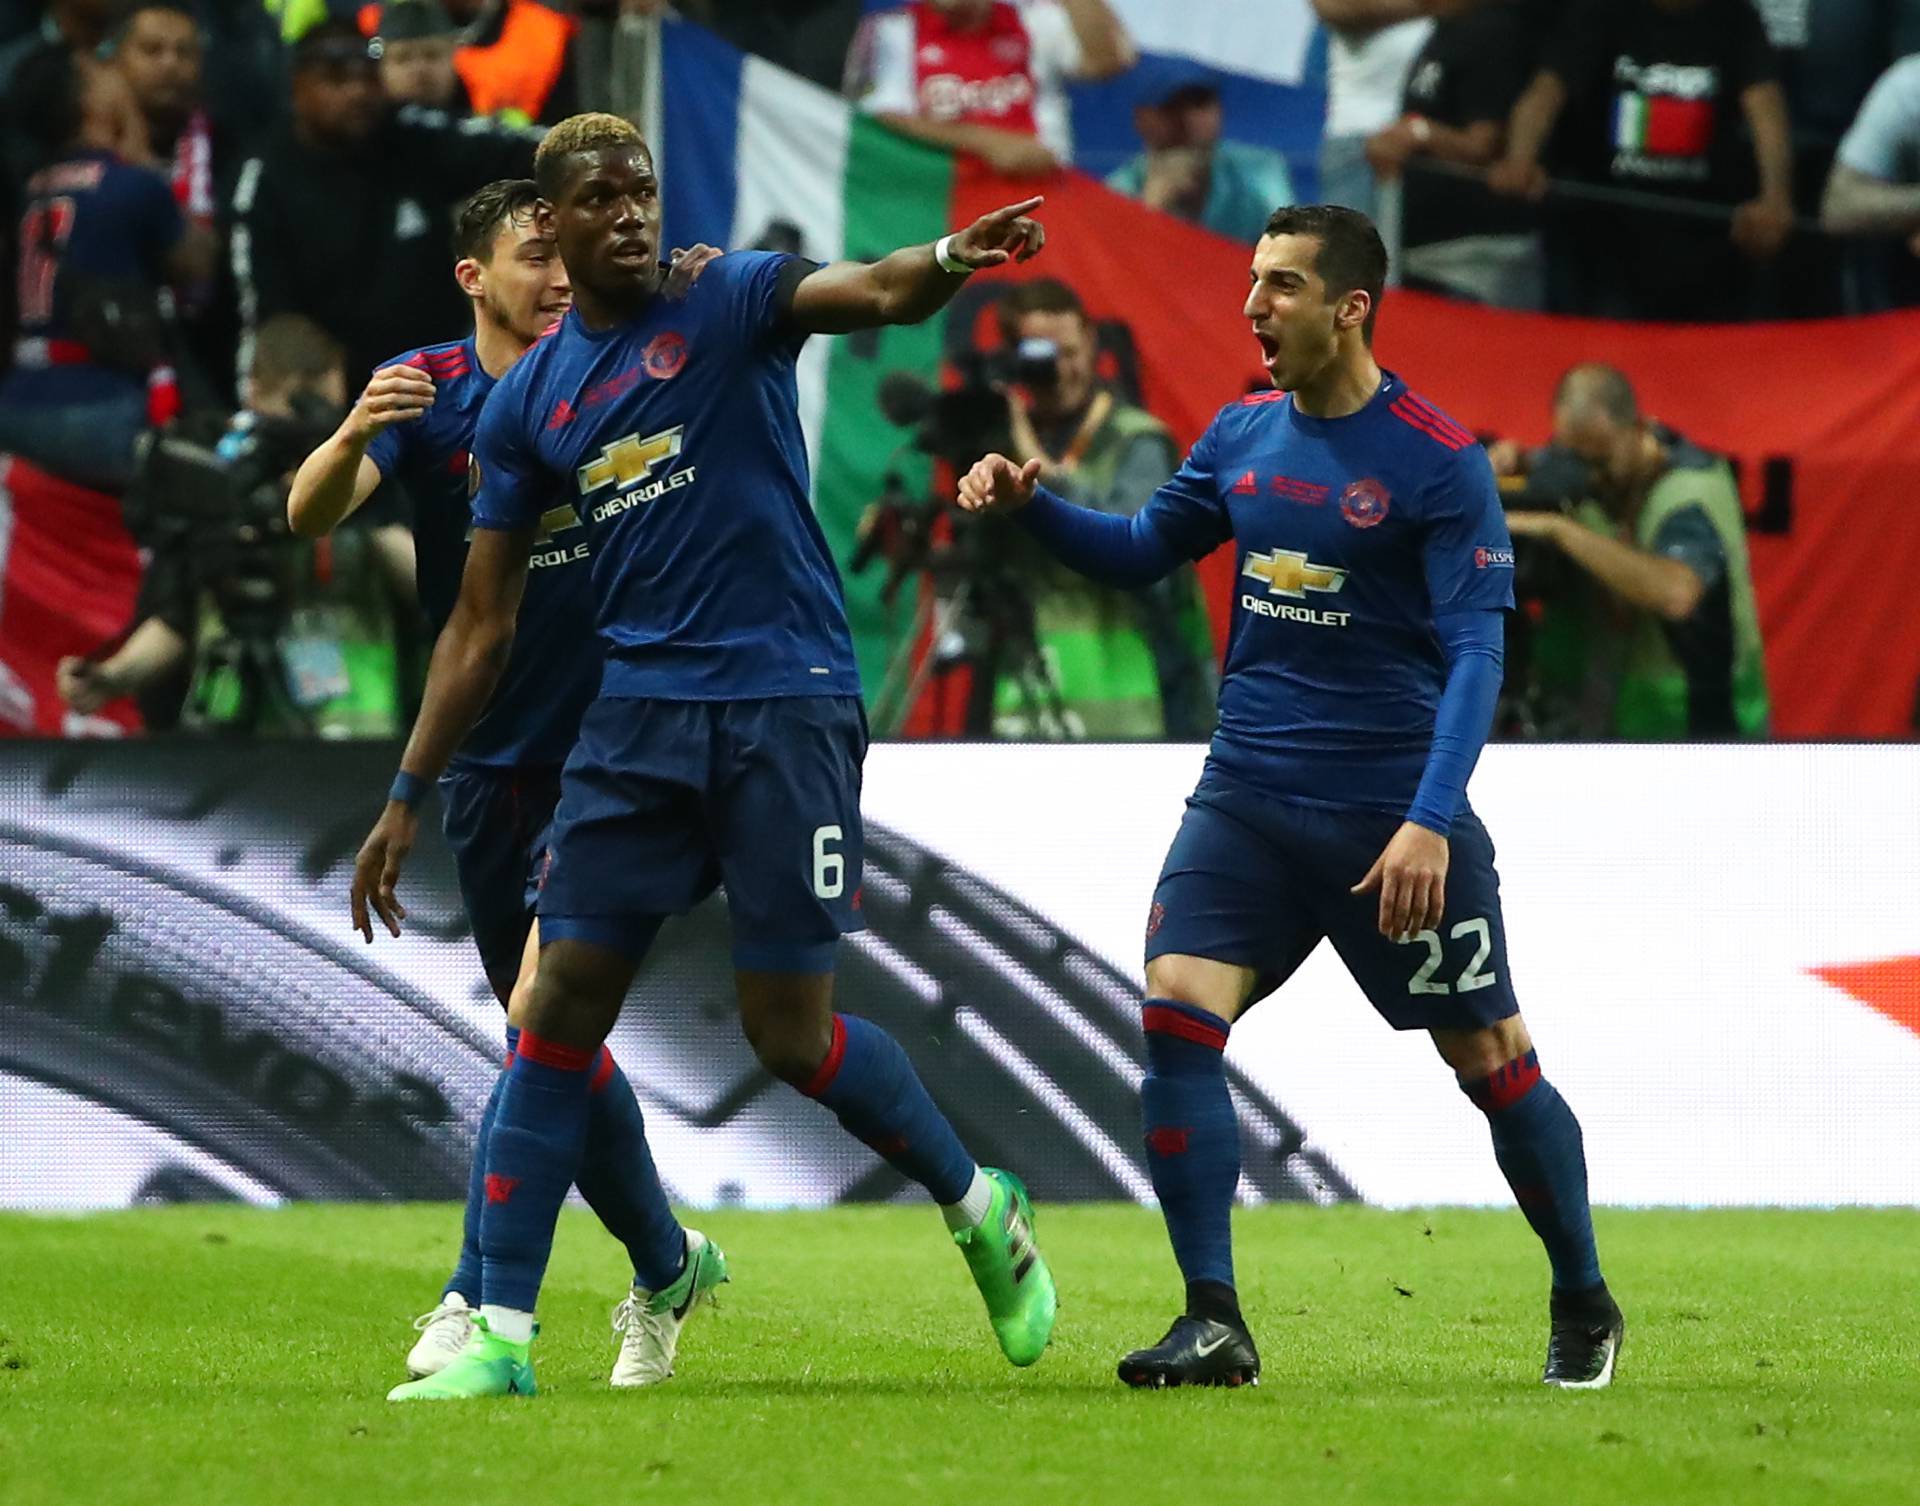 Manchester United's Paul Pogba celebrates scoring their first goal with Henrikh Mkhitaryan and Matteo Darmian